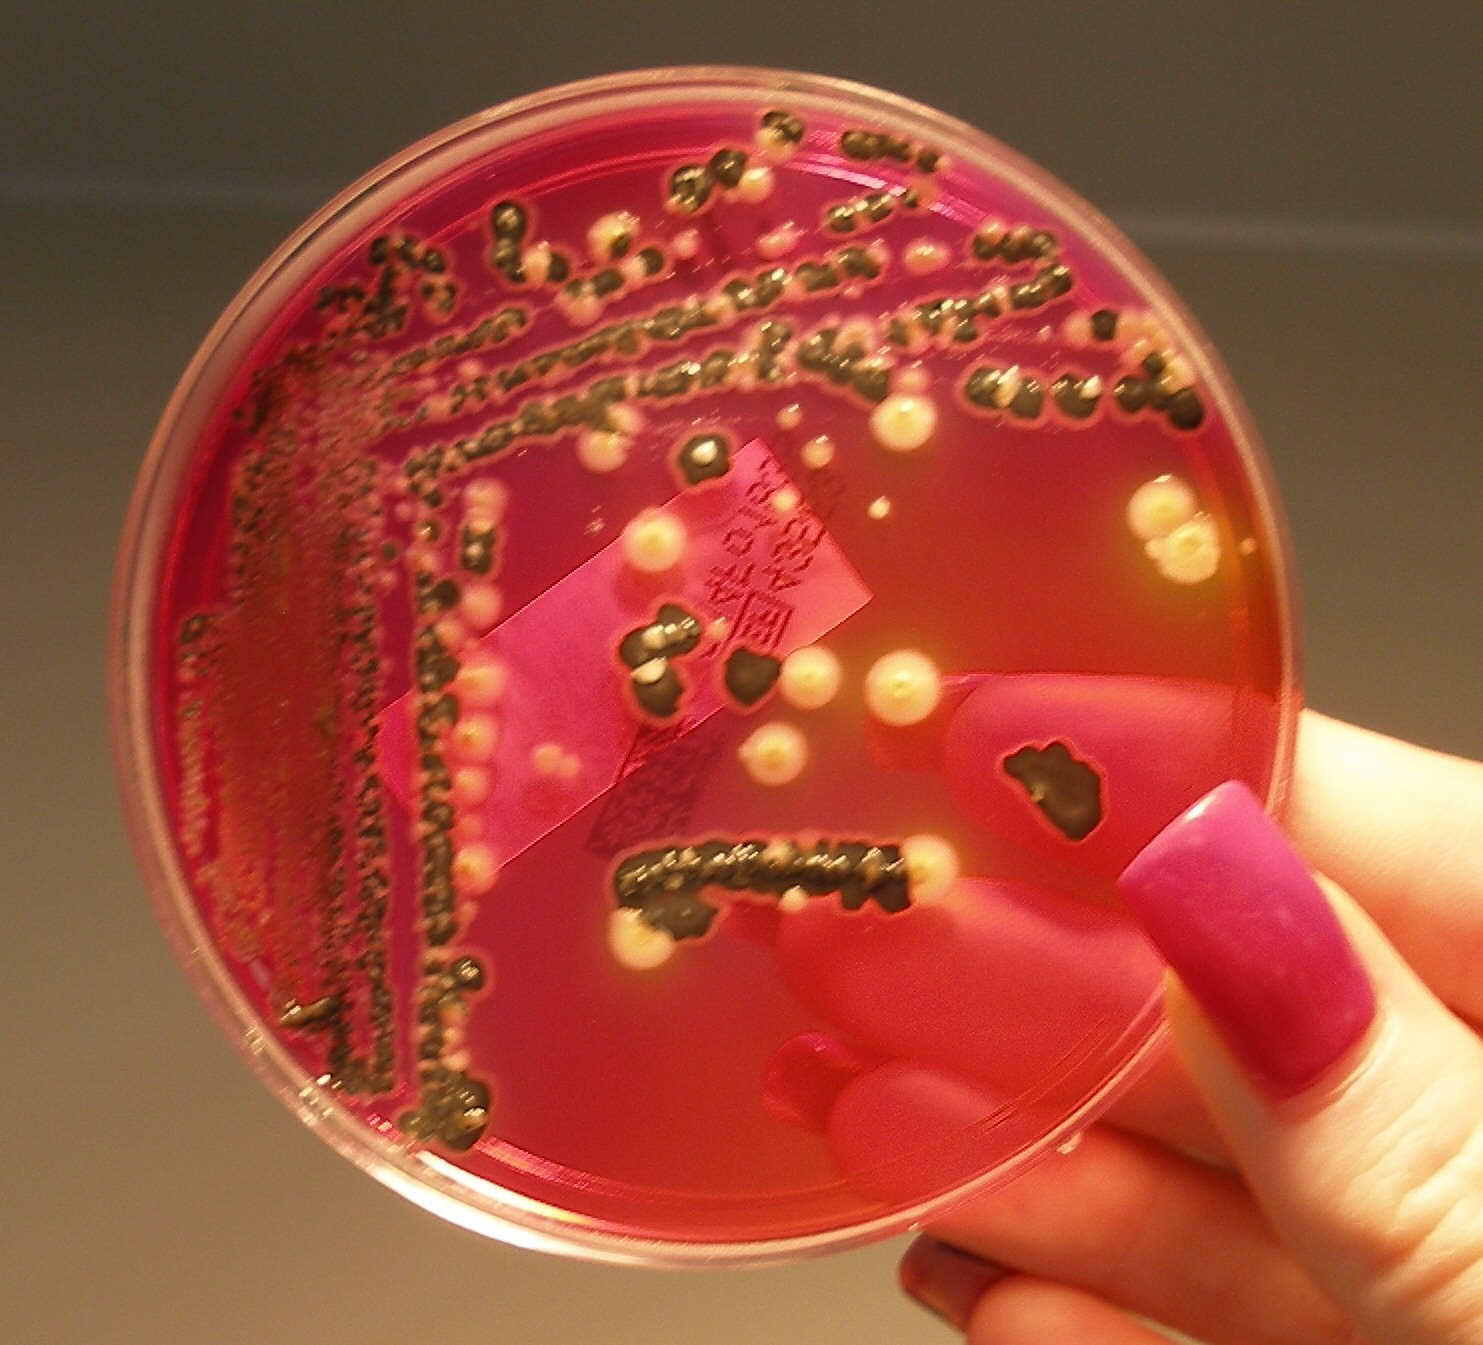 Bacteria in a Dish